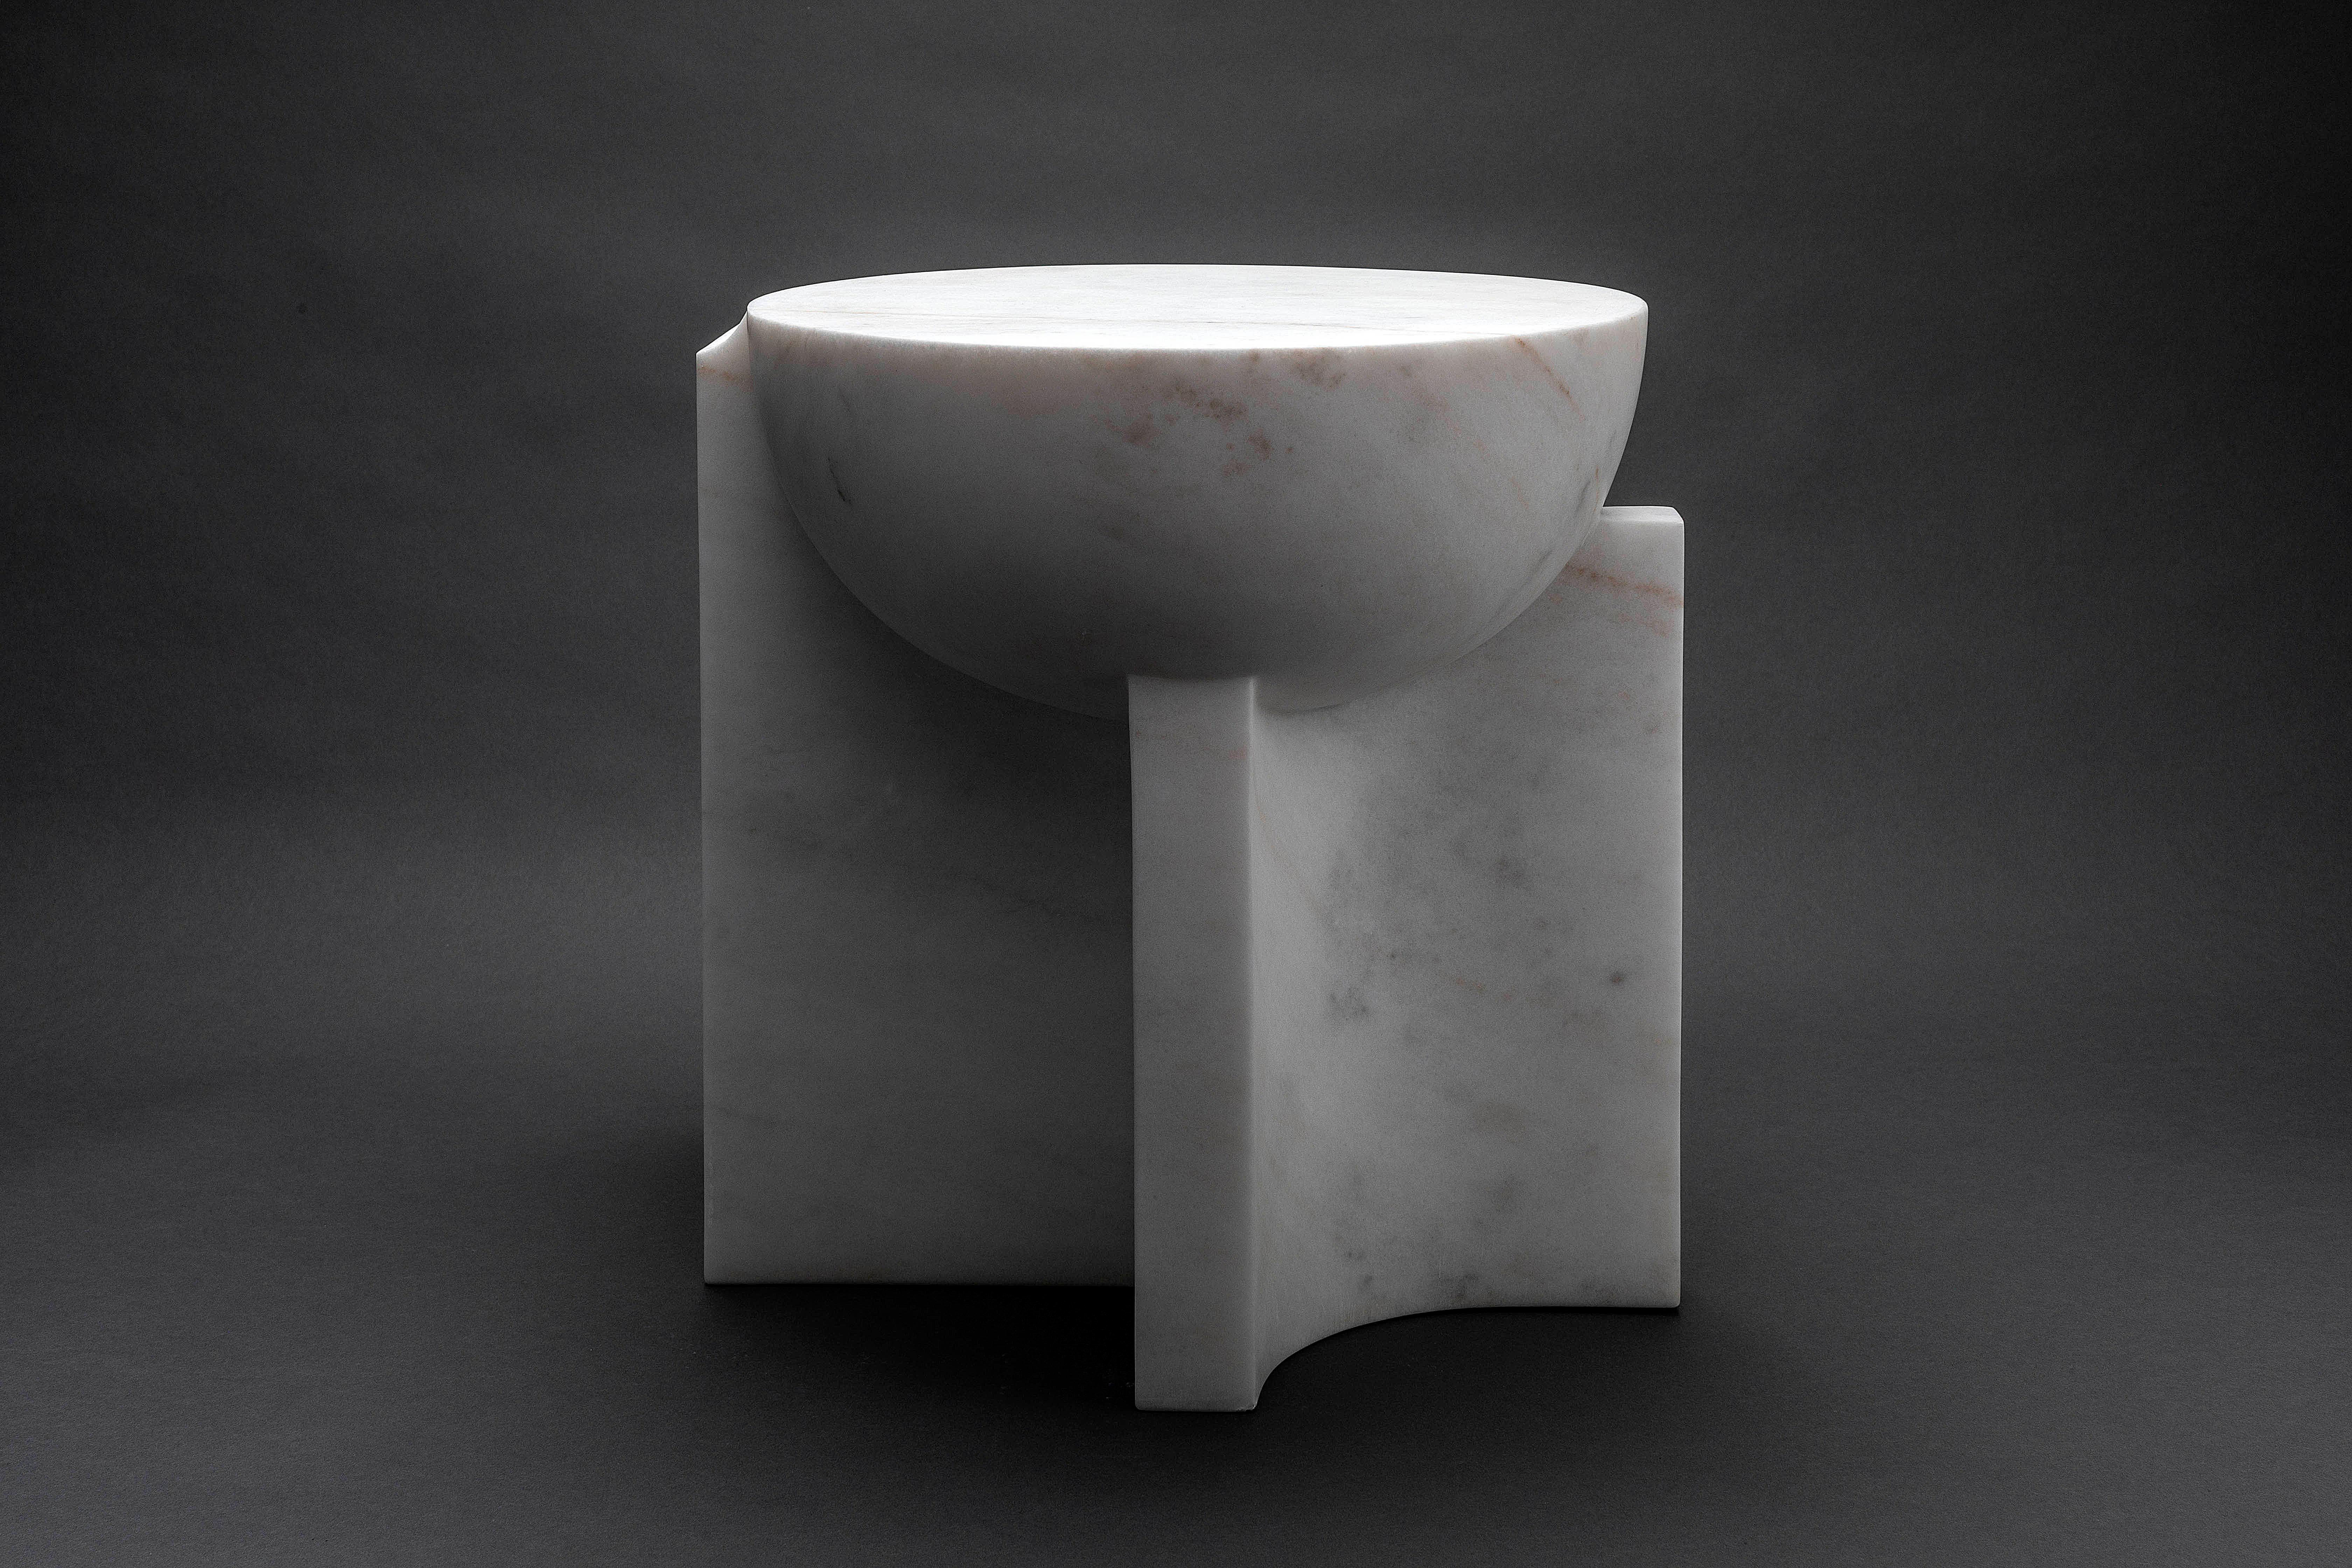 Banquito Galeana stool by Jorge Diego Etienne
Limited Edition of 10 + 1 AP
Dimensions: D 35 x W 35 x H 37.5 cm
Material: alabaster

Galeana is a collection of 6 objects designed by Jorge Diego Etienne and sculpted in alabaster by the Master